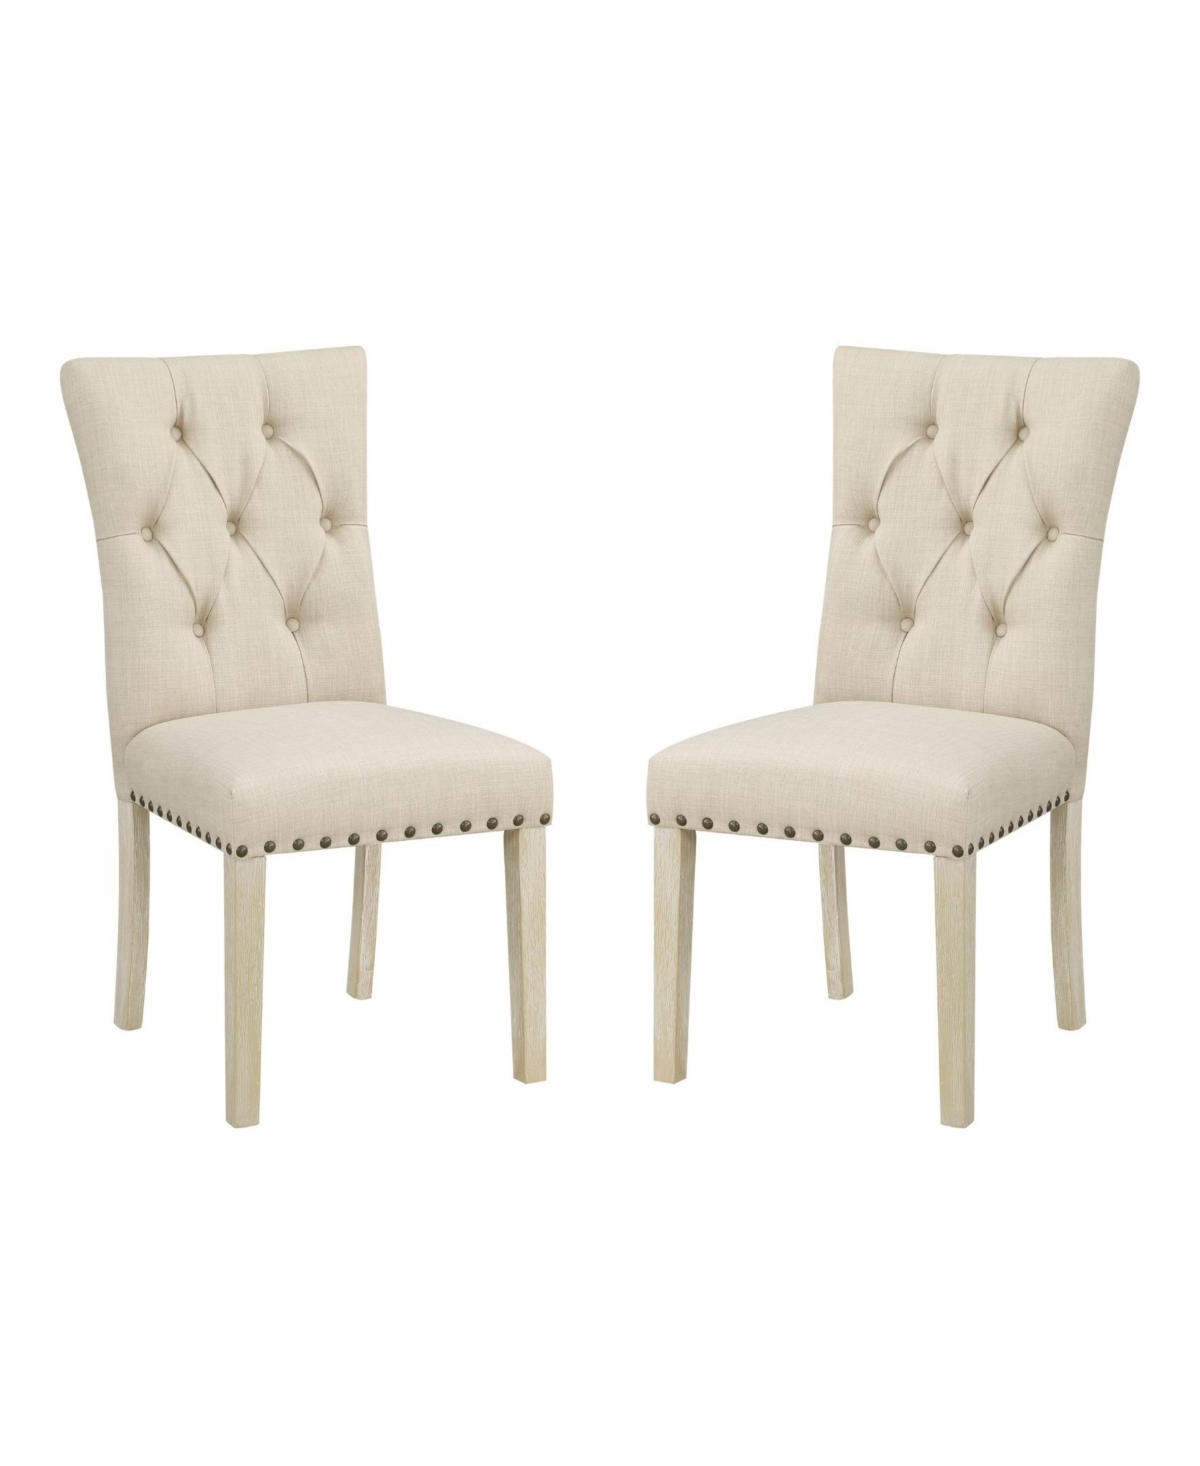 Shop Osp Home Furnishings Preston Dining Chair 2-pack With Antique-like Bronze Nailheads And Brushed Legs In Fabric In Burlap